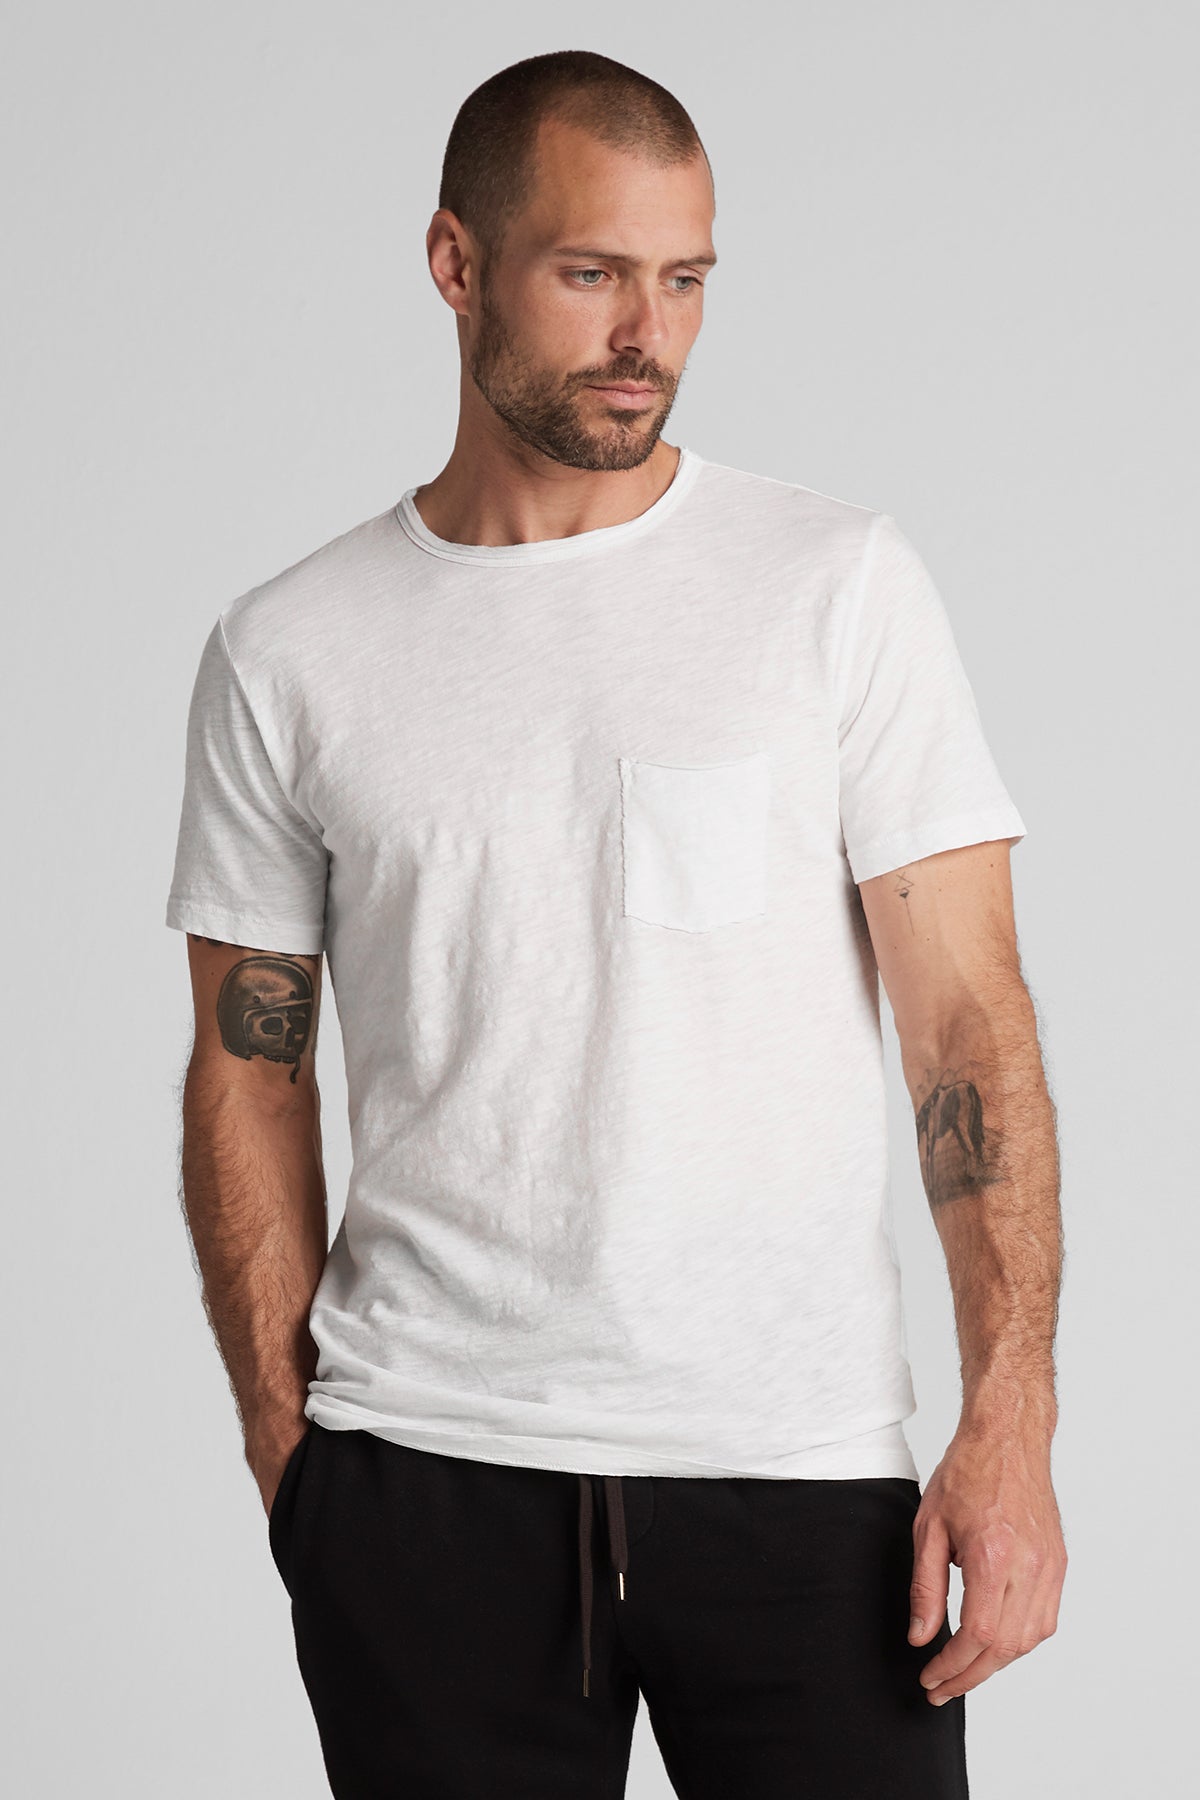 A man with tattoos on his arms, wearing a white textured cotton slub CHAD TEE with a chest pocket and black pants, stands against a neutral background. (Brand Name: Velvet by Graham & Spencer)-25485730709697